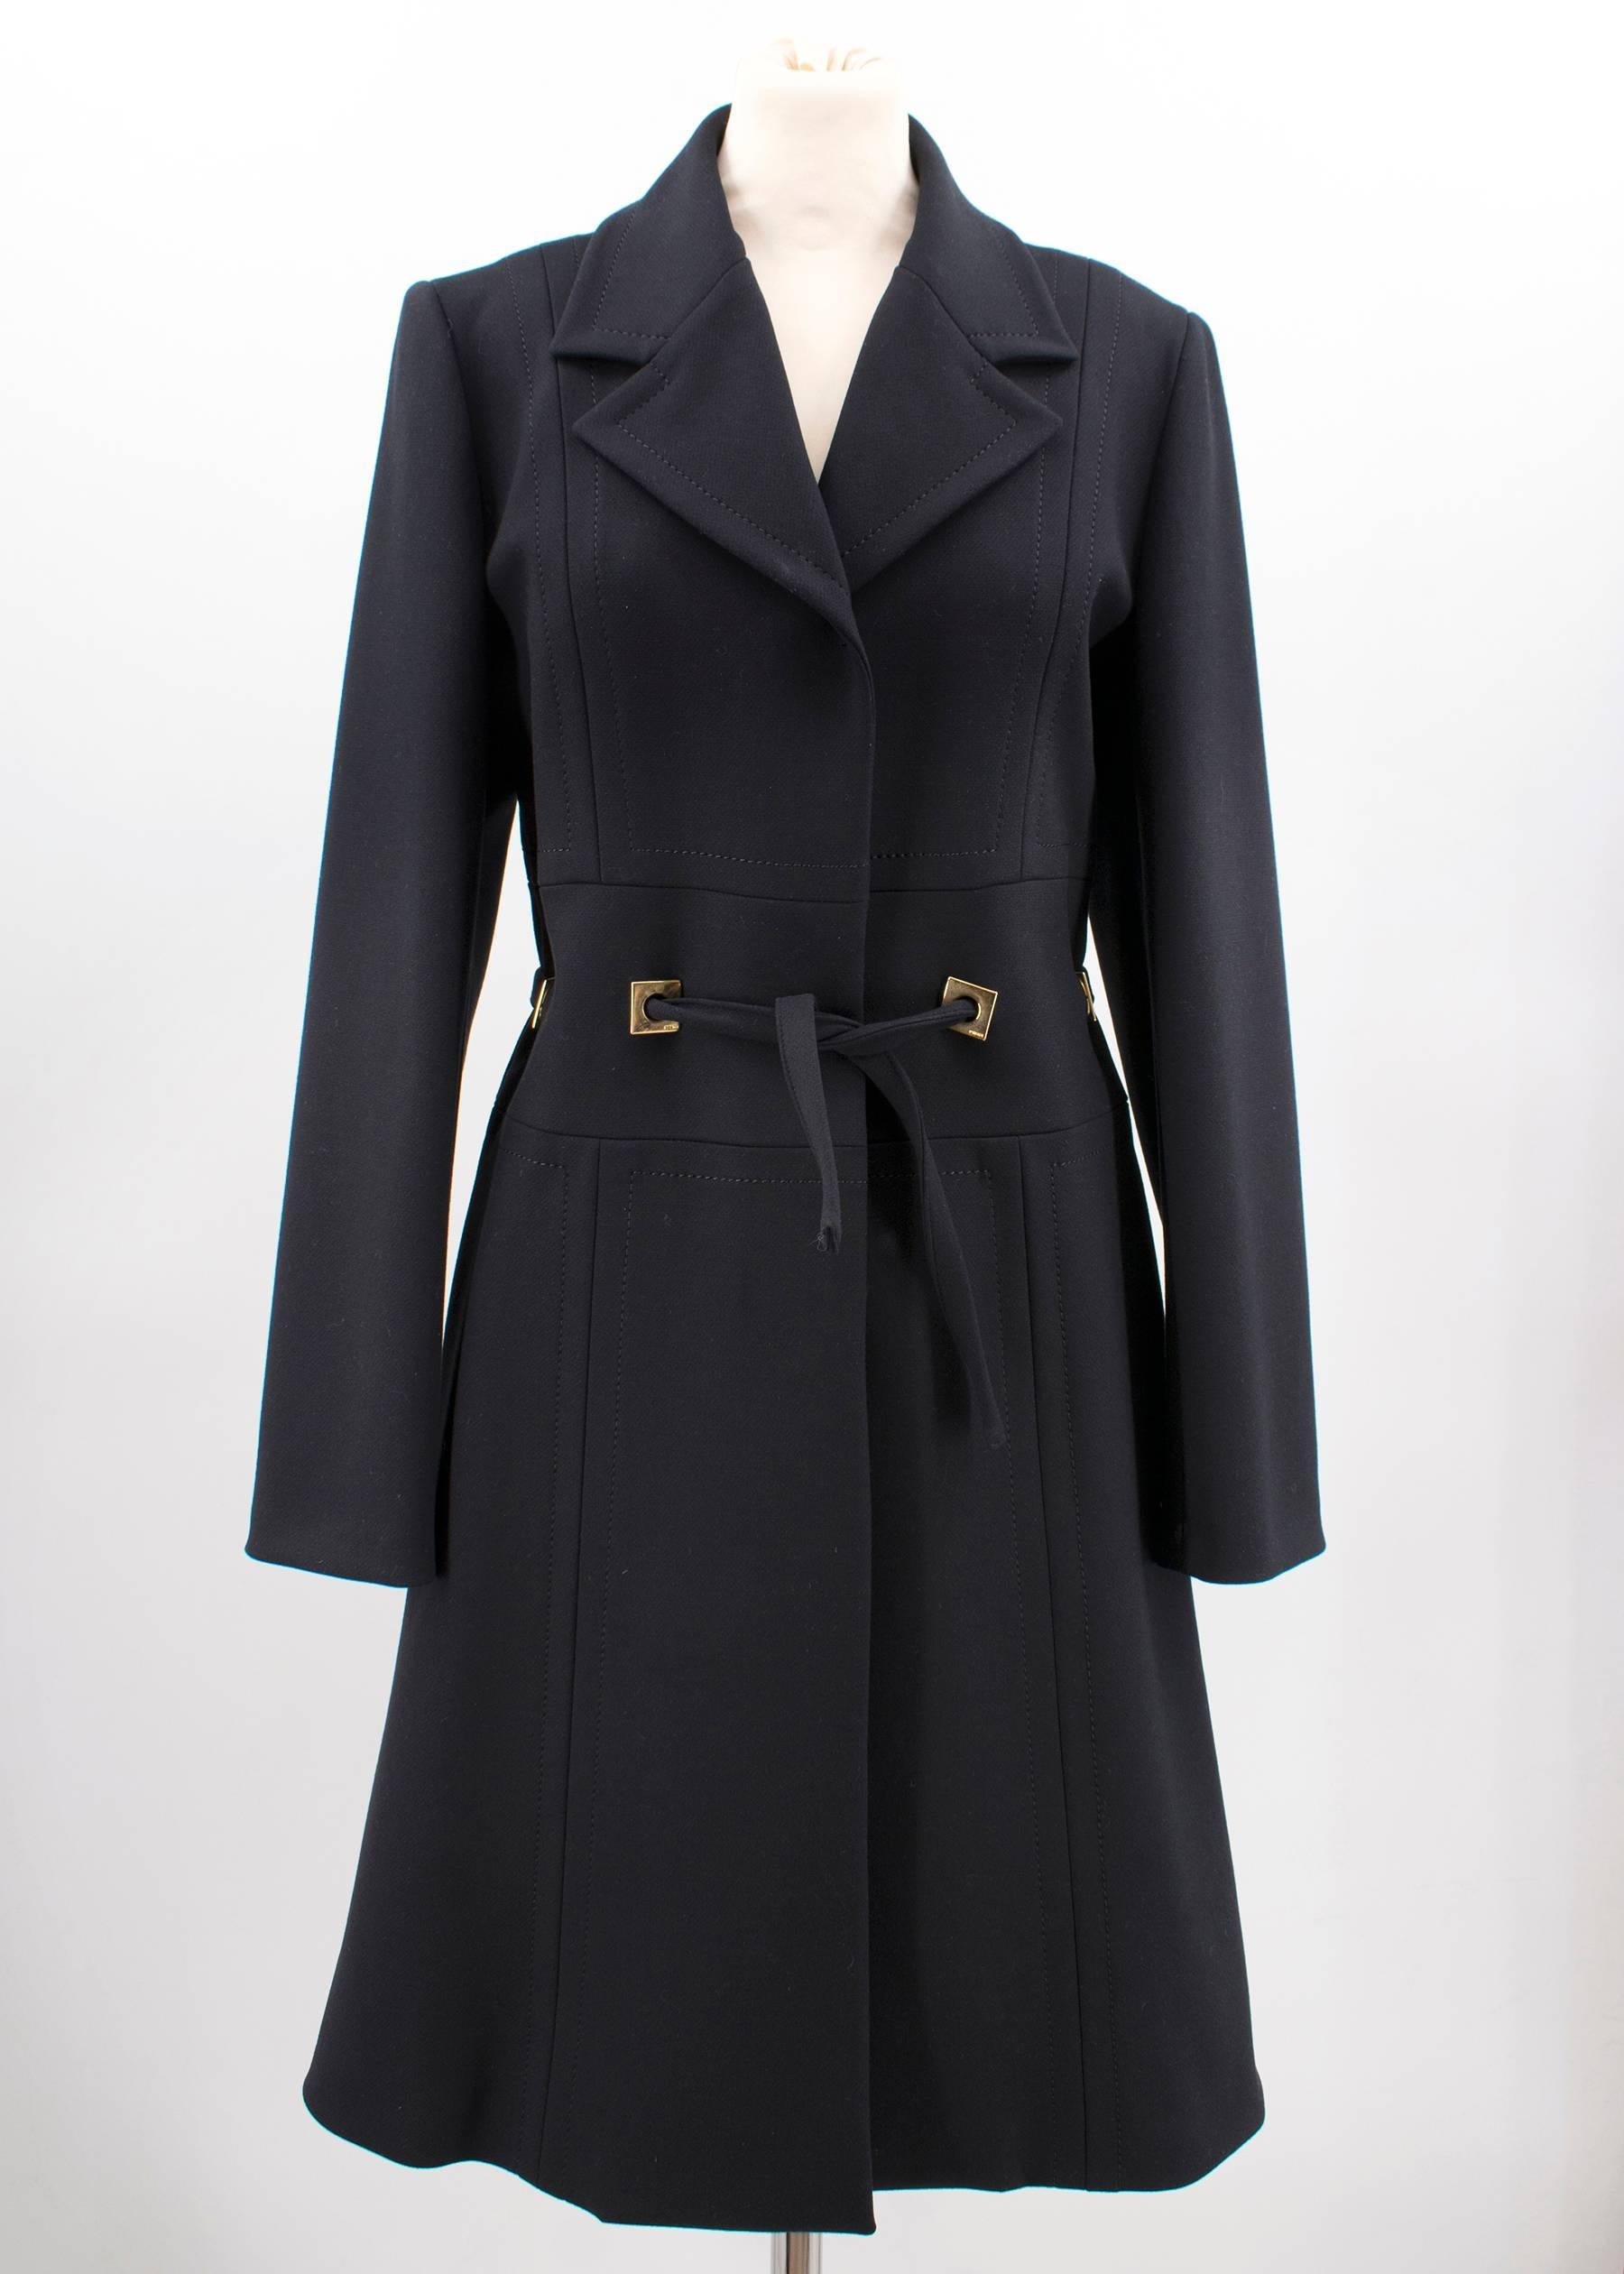 Fendi black long belted coat

Featuring:
-classic lapels
-long sleeves
-button fastening
-mid-length
-self-tie fastening 
Made in Italy

Condition: 9/10	
Approx. 
Shoulders: 41cm 
Breast: 50cm 
Length: 99cm